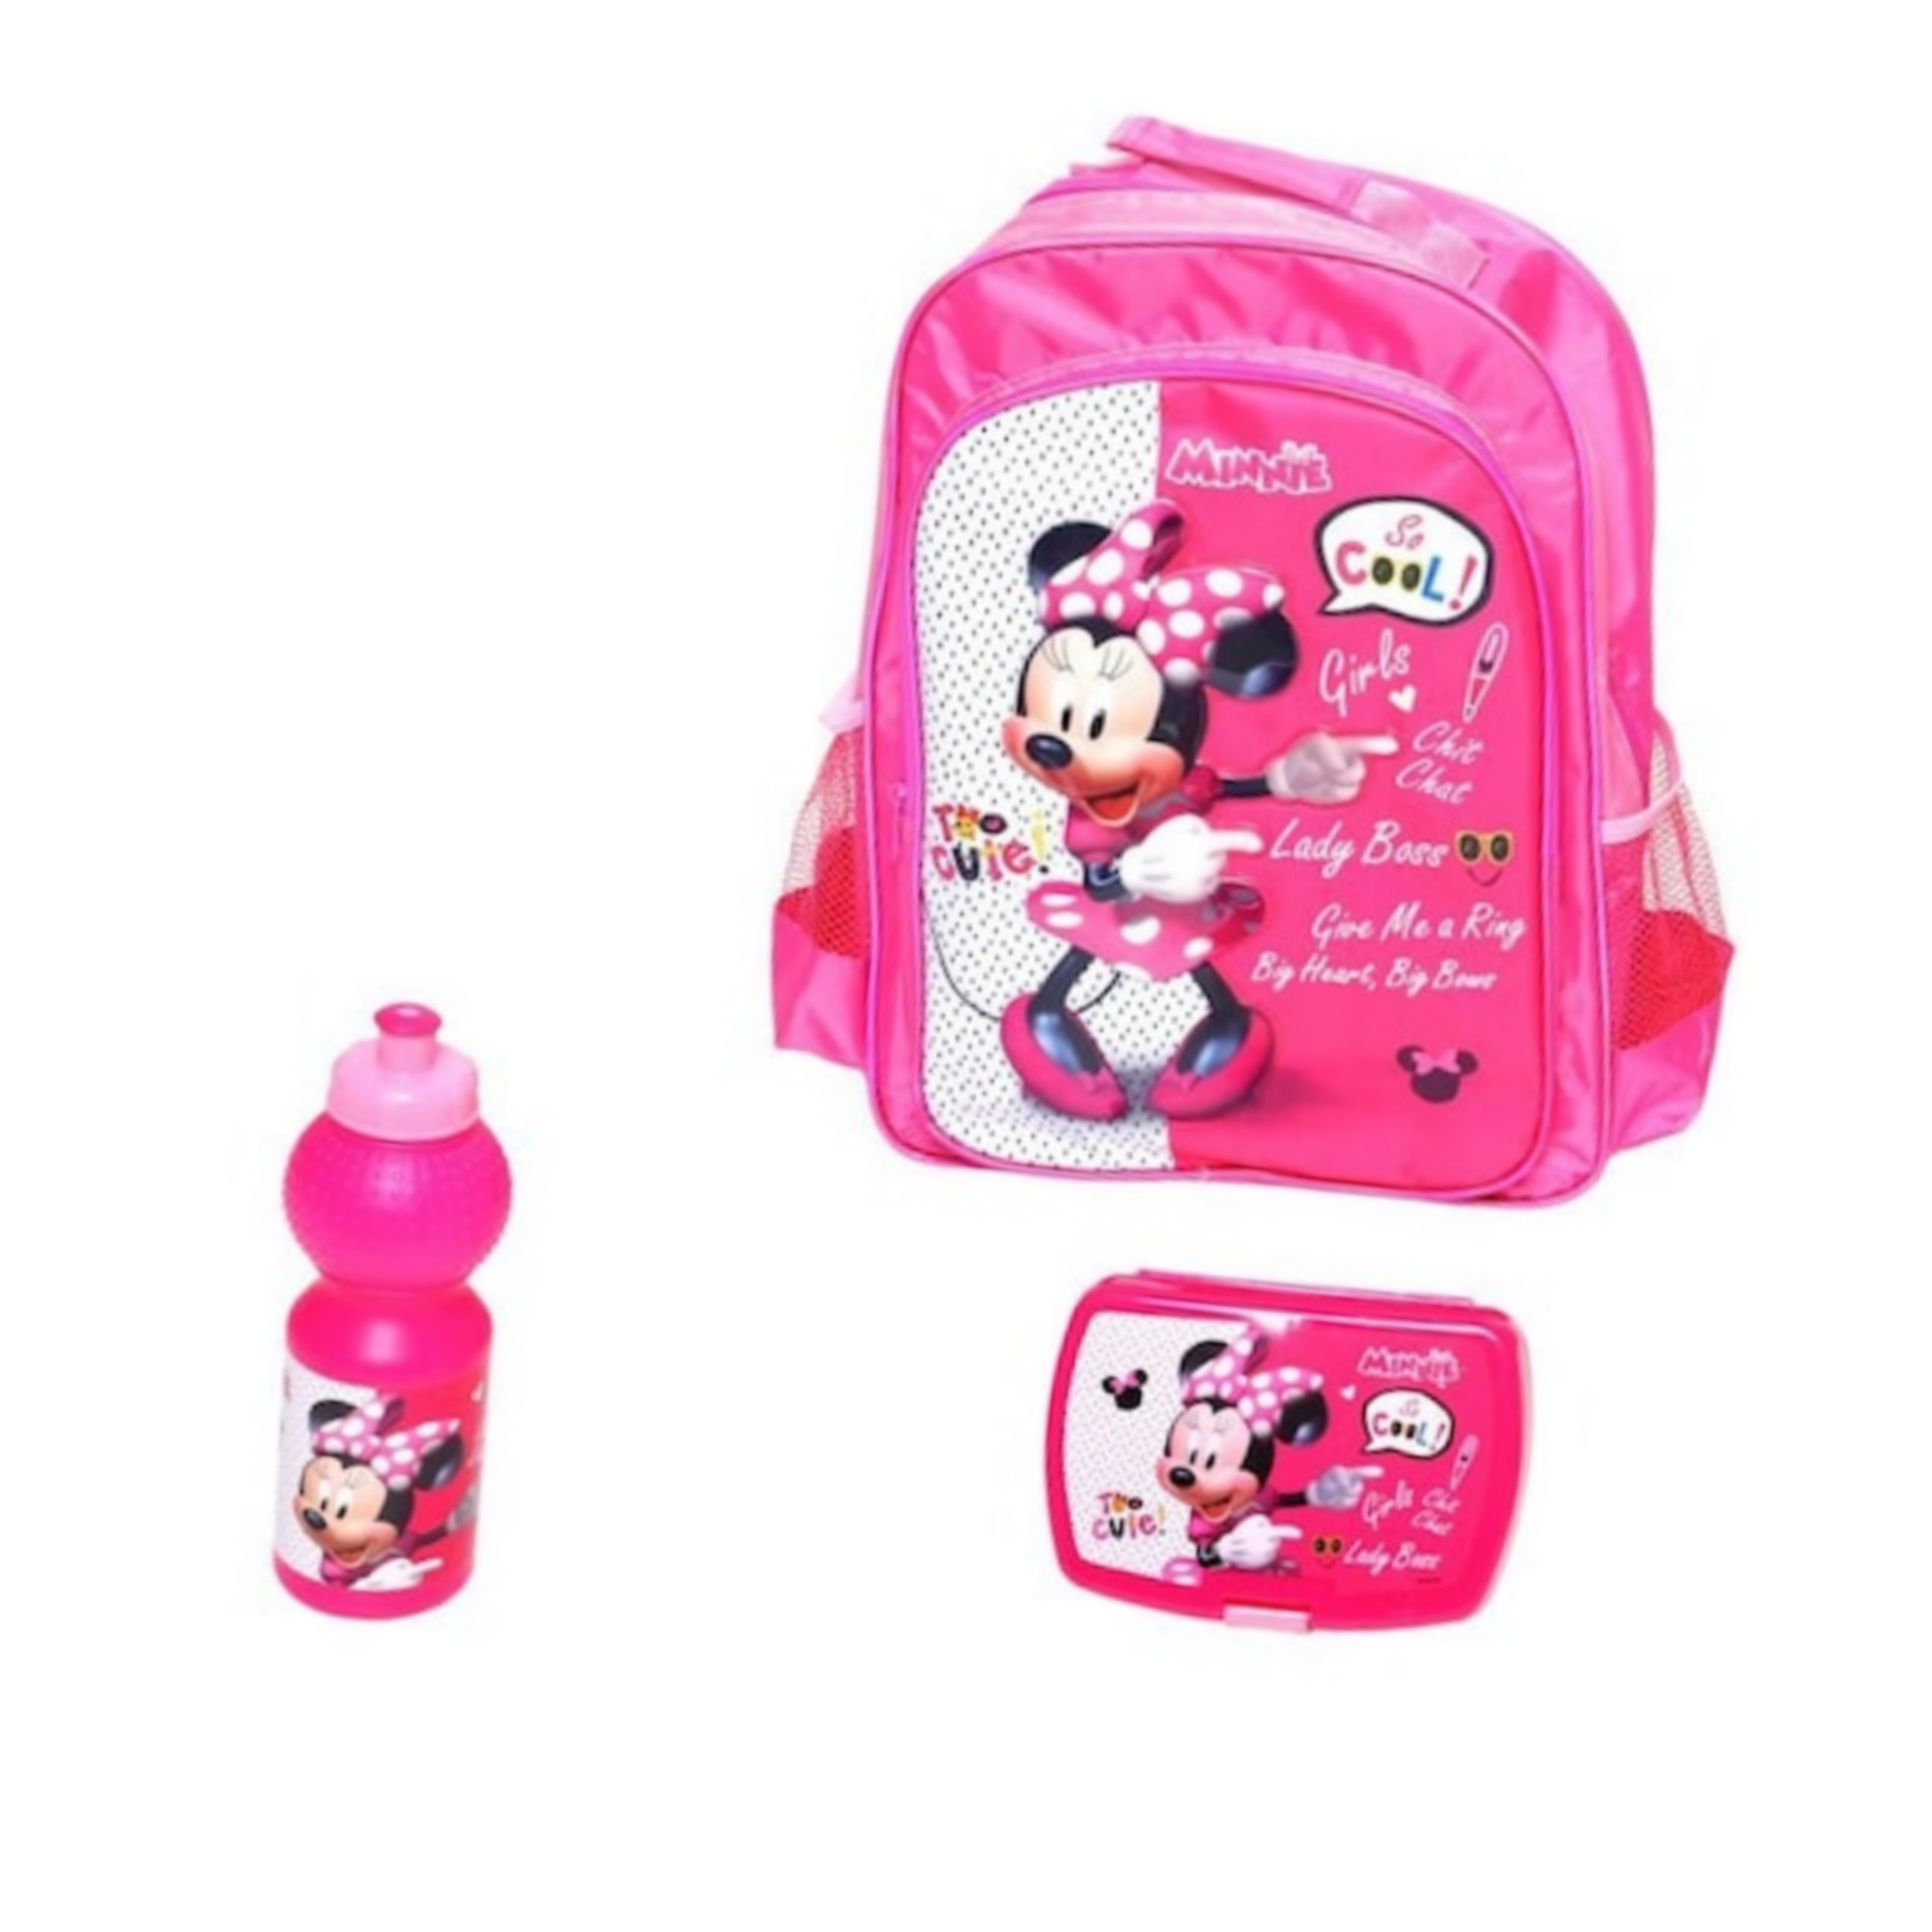 Disney Girls Lunch Bag Bottle and Snack Pot Red Minnie Mouse - One